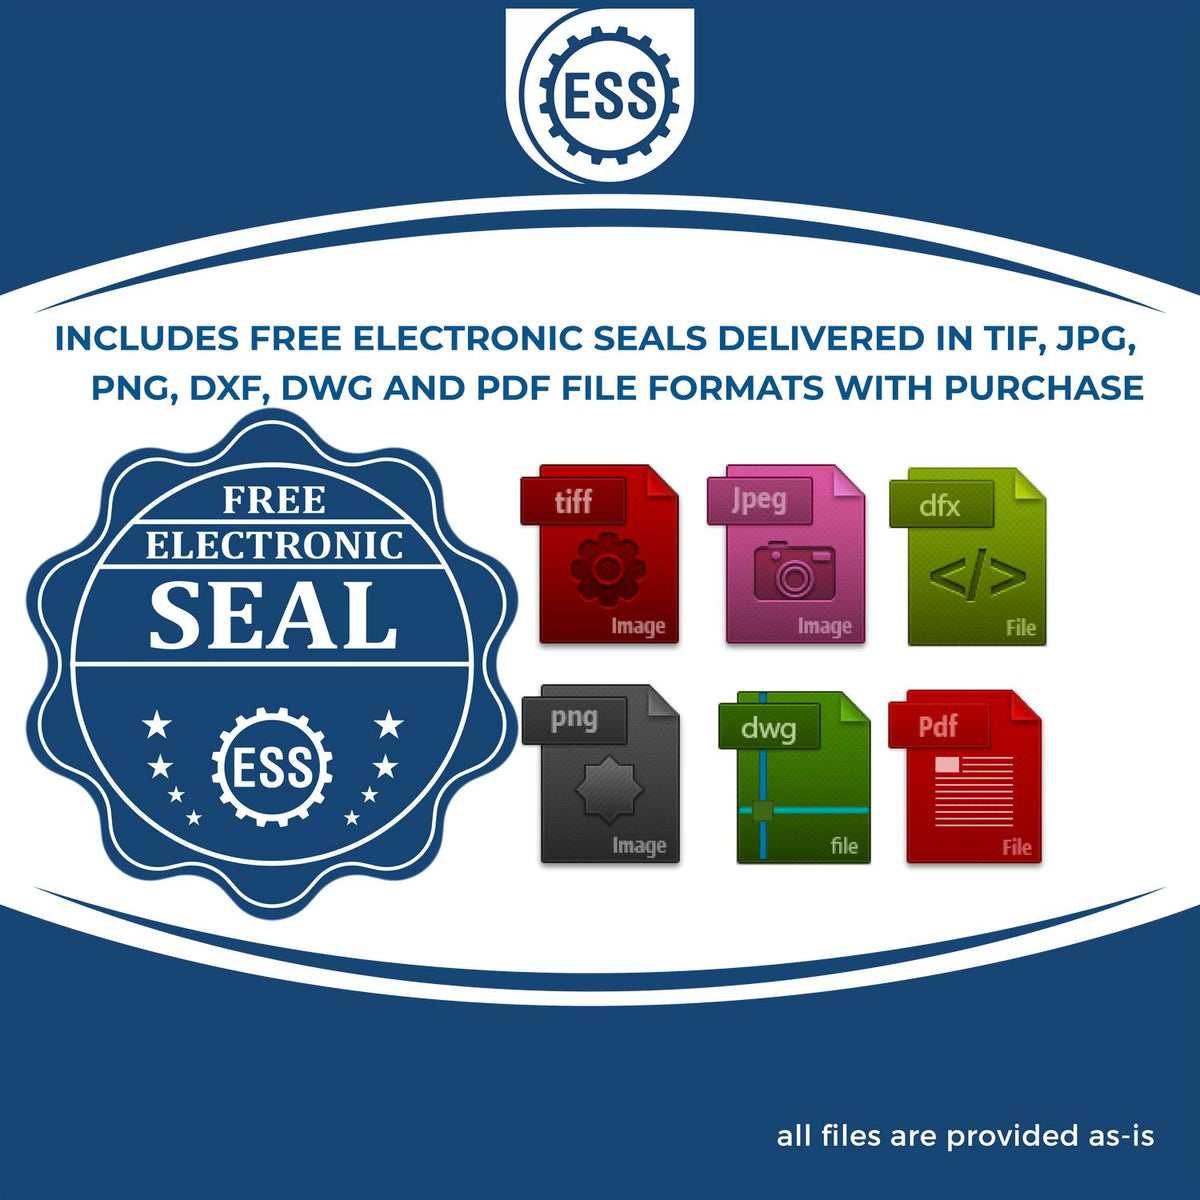 An infographic for the free electronic seal for the Heavy Duty Cast Iron Delaware Engineer Seal Embosser illustrating the different file type icons such as DXF, DWG, TIF, JPG and PNG.